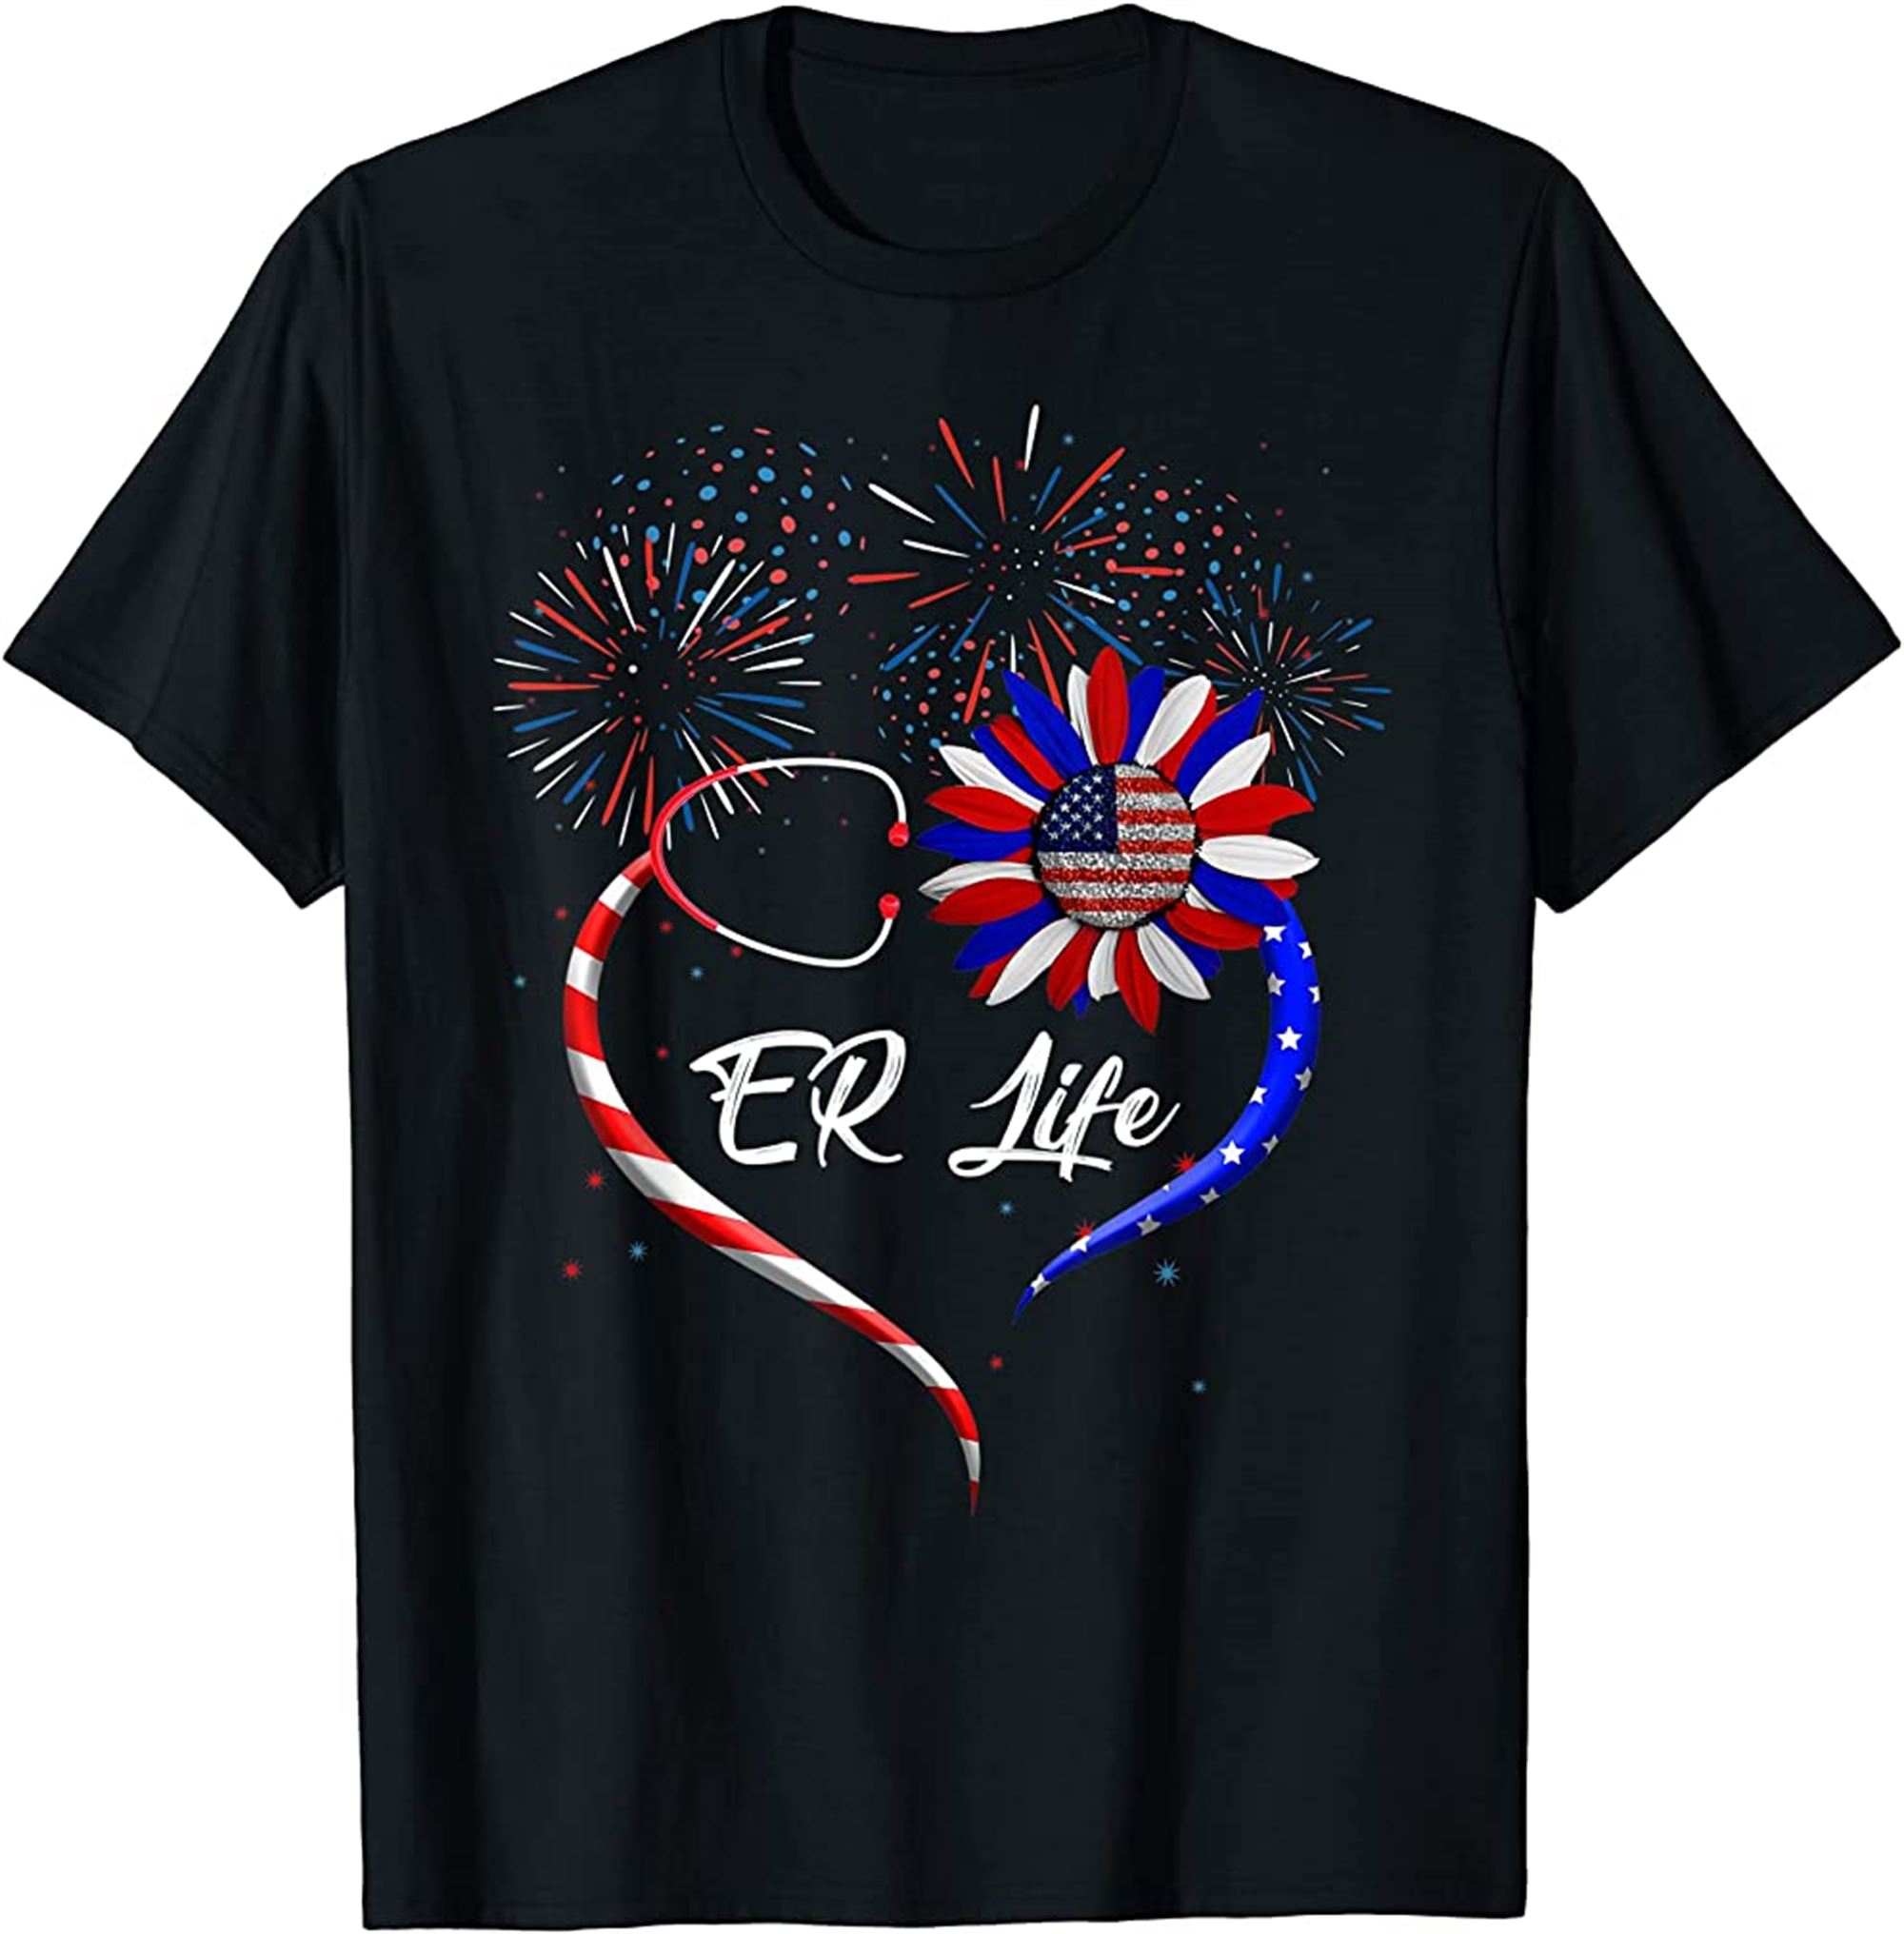 Stethoscope Sunflower Patriotic Er Life Nurse 4th Of July T-shirt Full Size Up To 5xl